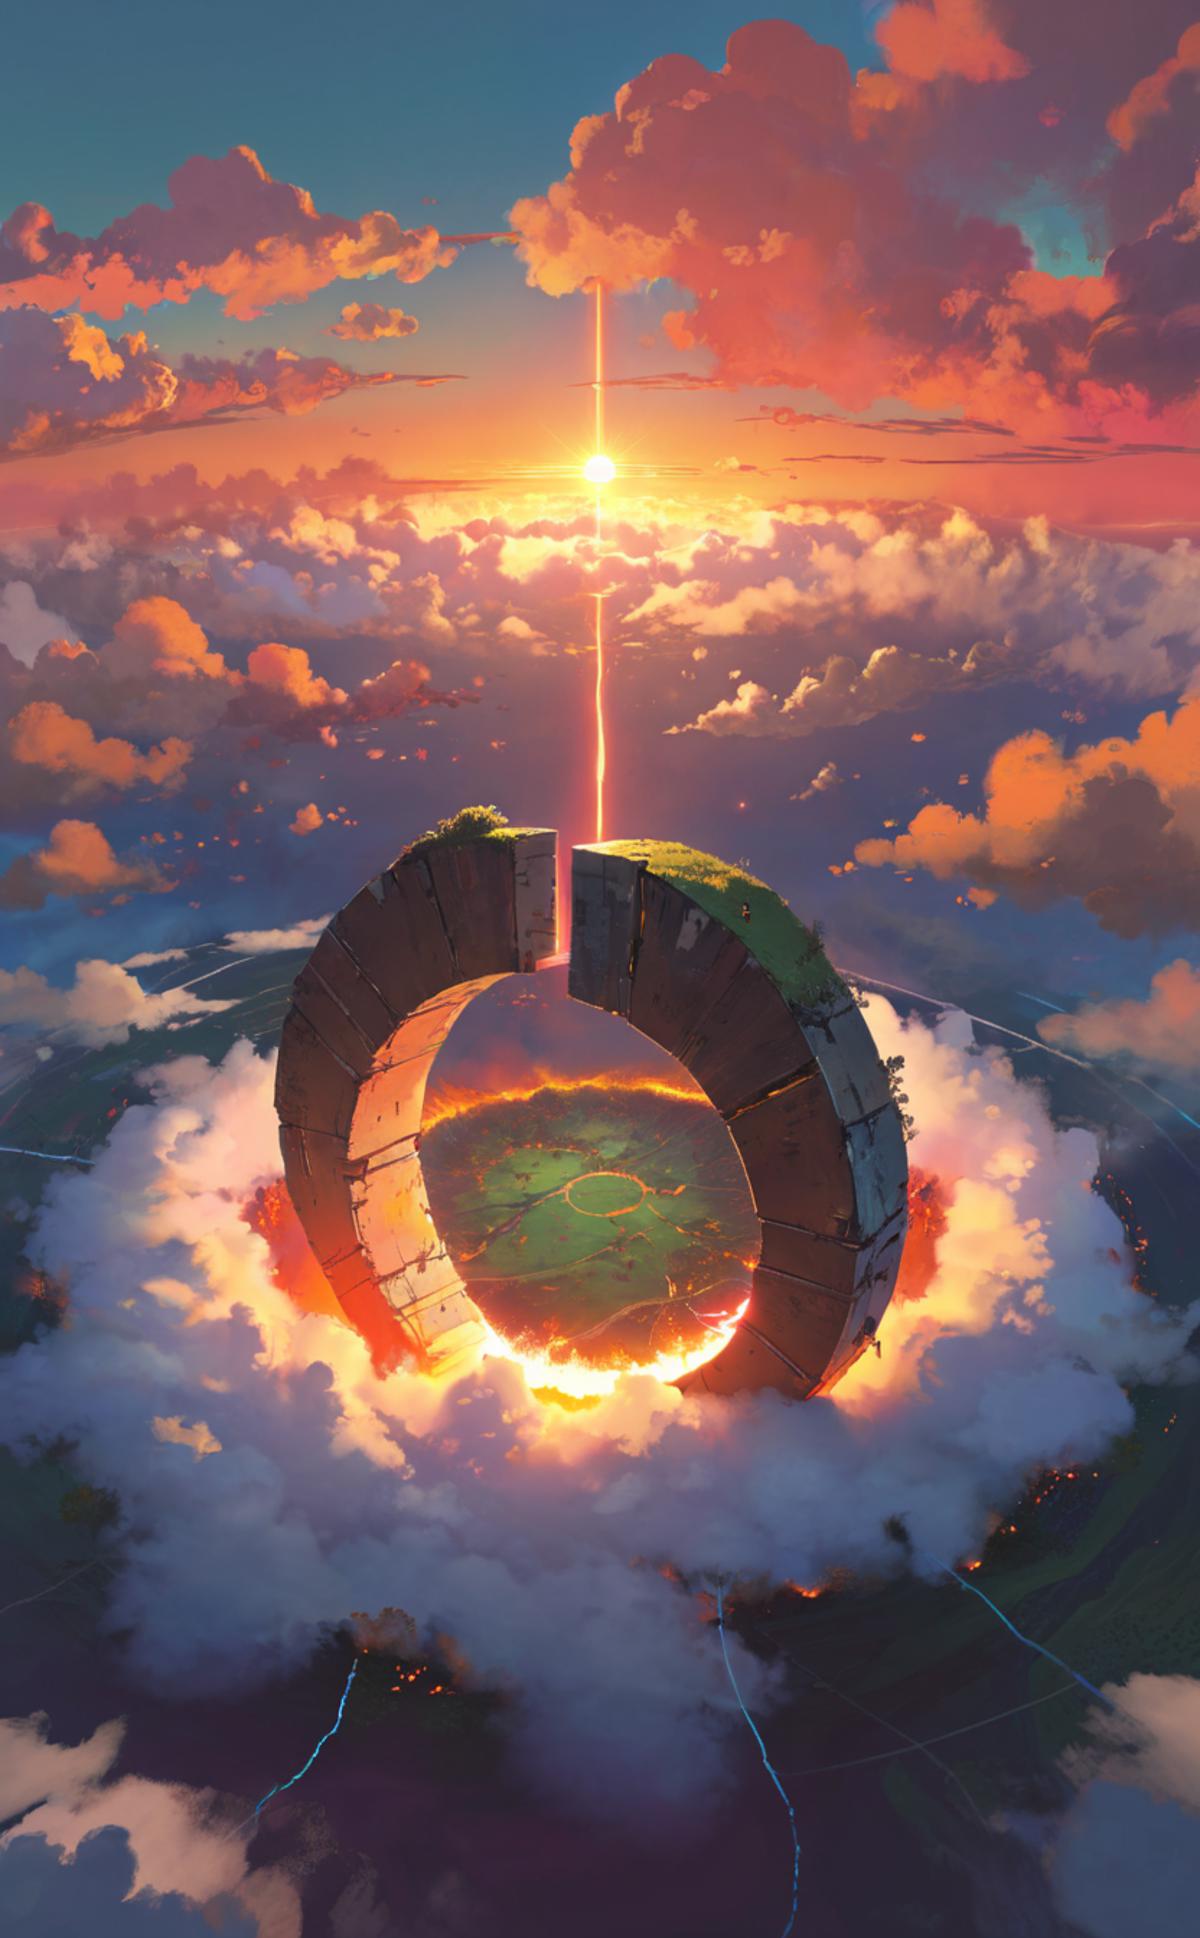 A Celestial Ring with a Field Inside and a Sun in the Background